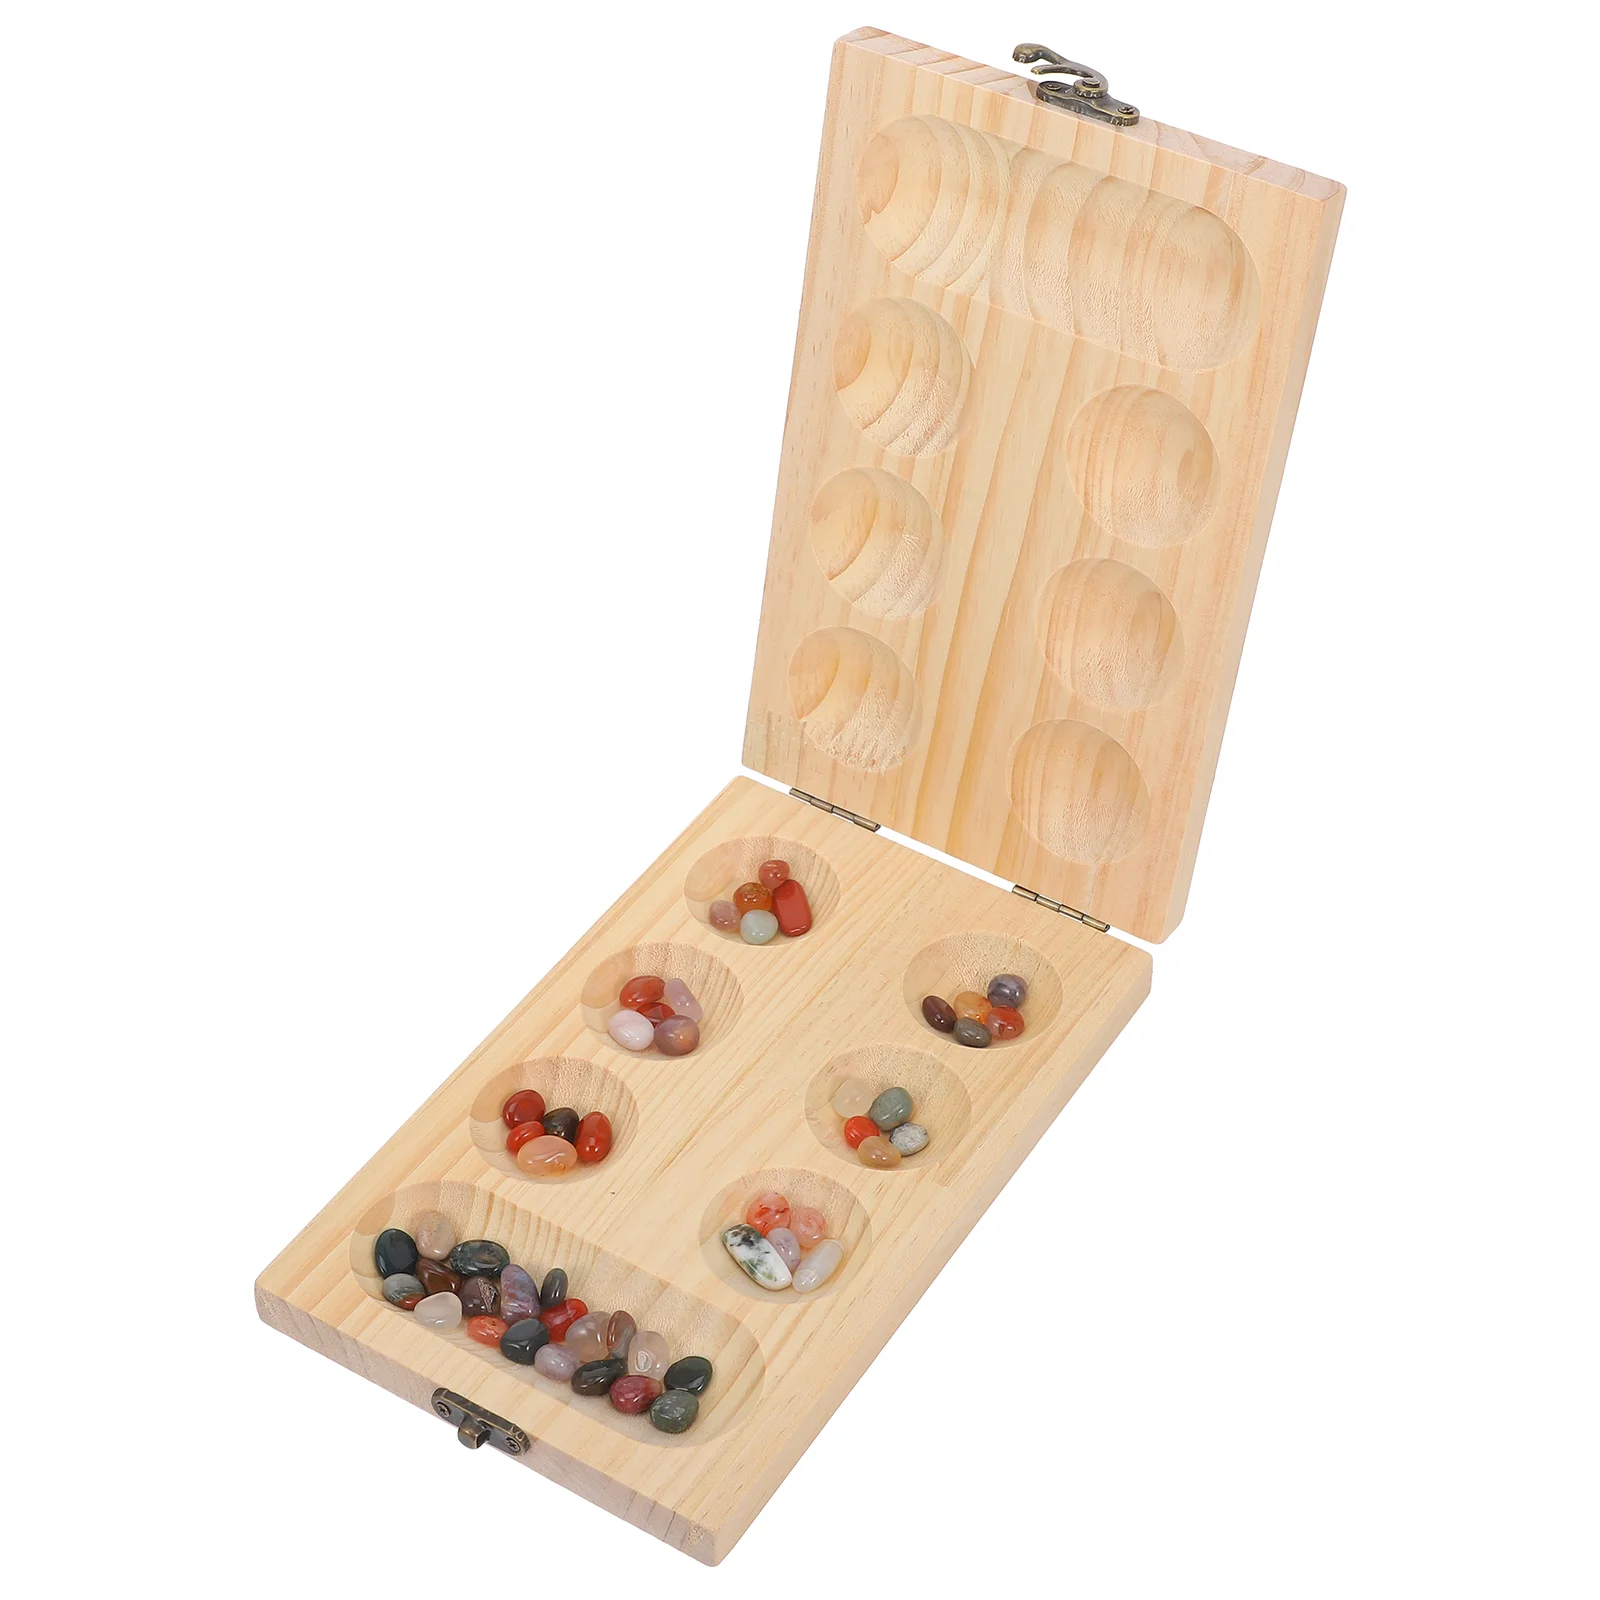 

Mancala Board Game Tabletop Stone Chess Pieces Logic Training Folding Wooden